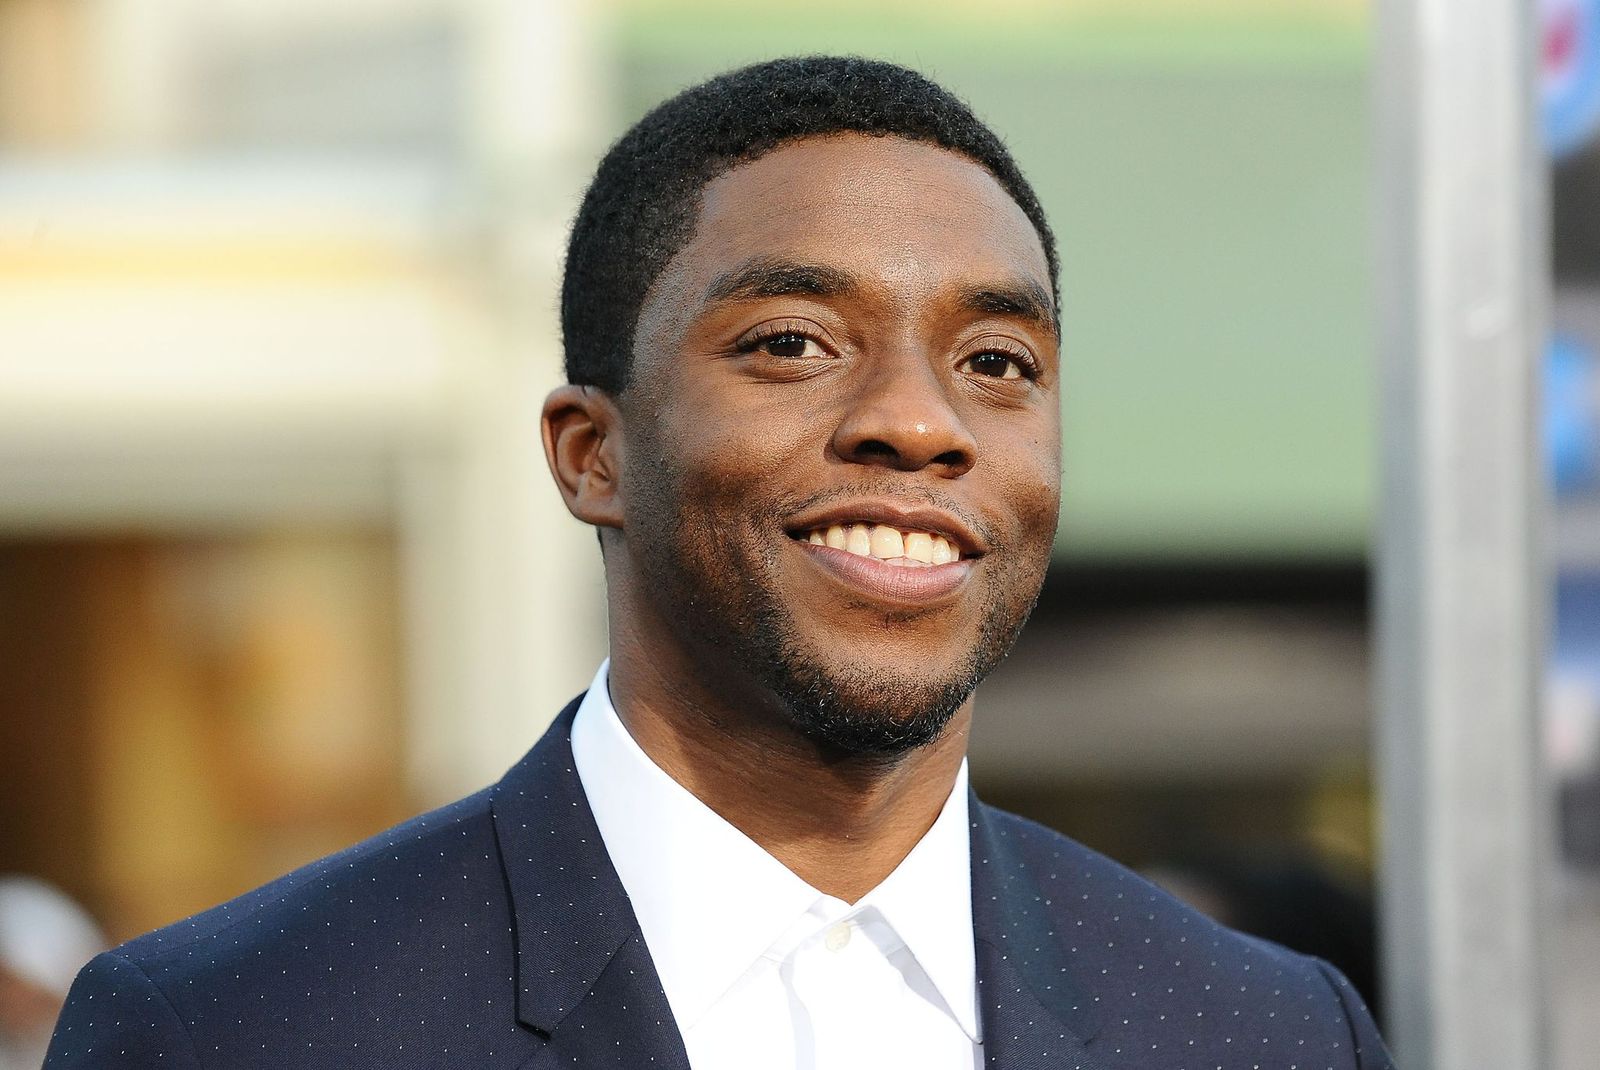 Late Chadwick Boseman at the premiere of "Draft Day" at Regency Bruin Theatre on April 7, 2014 in Los Angeles, California. | Photo: Getty Images.